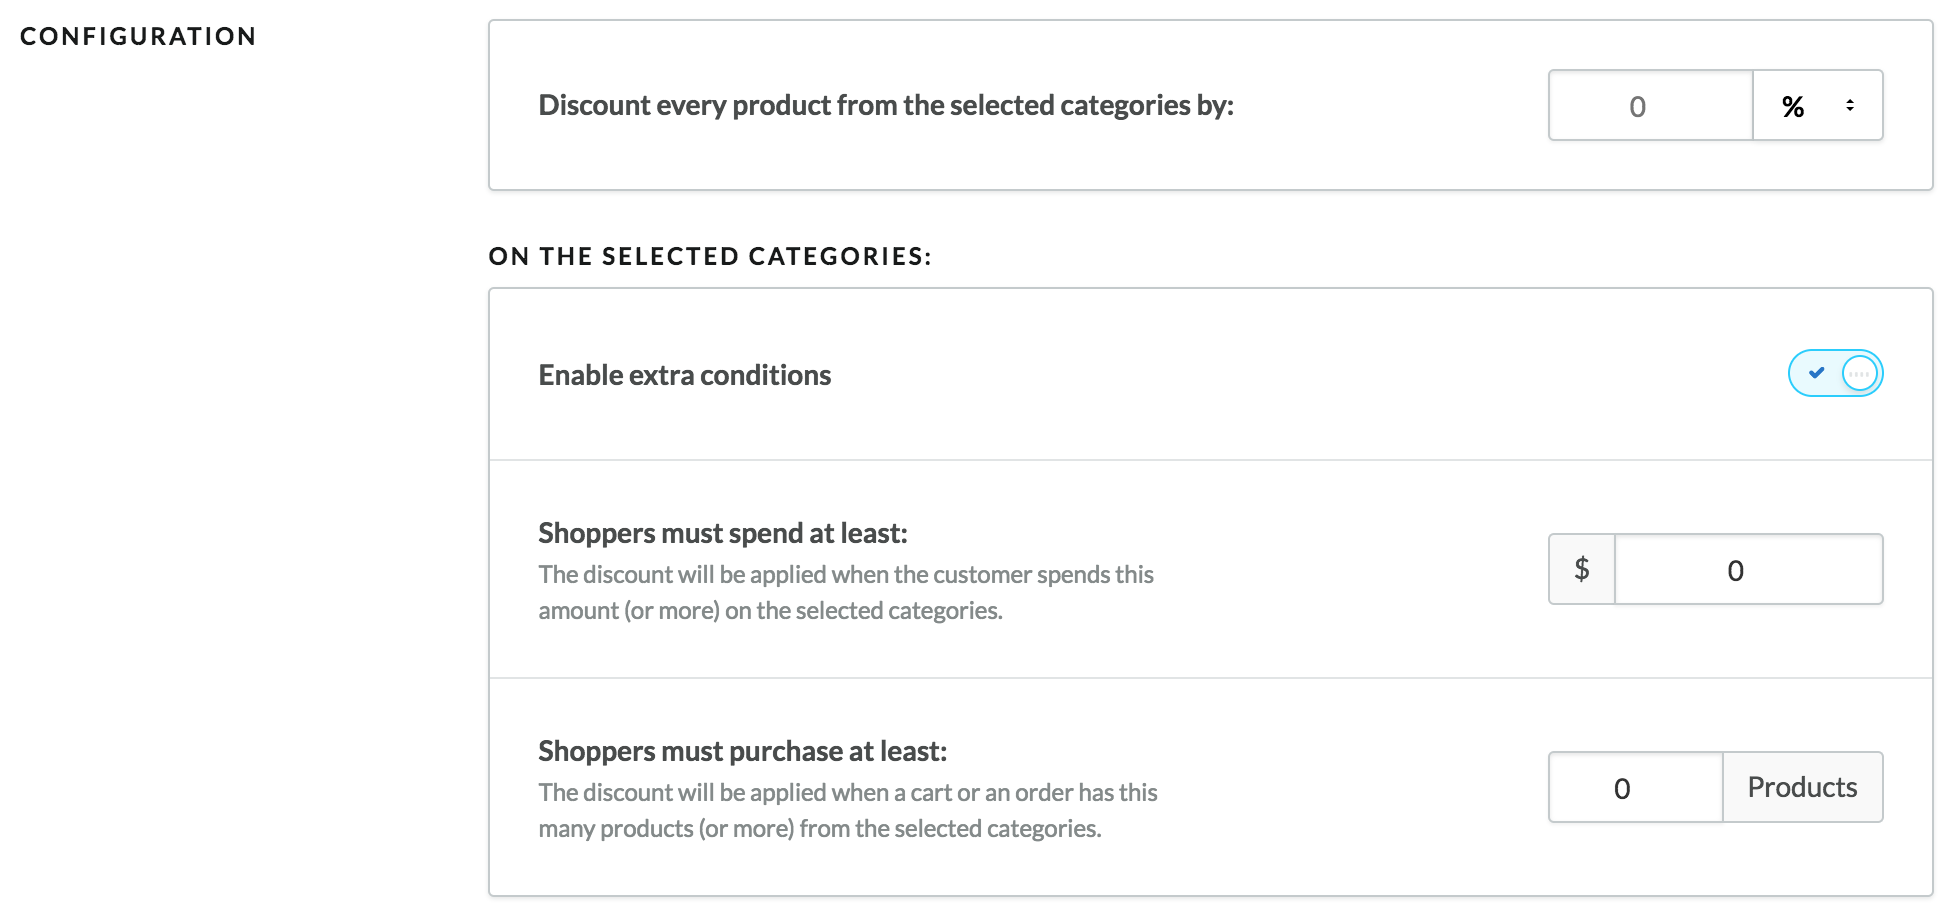 Shows the configuration section of the discount rules settings.